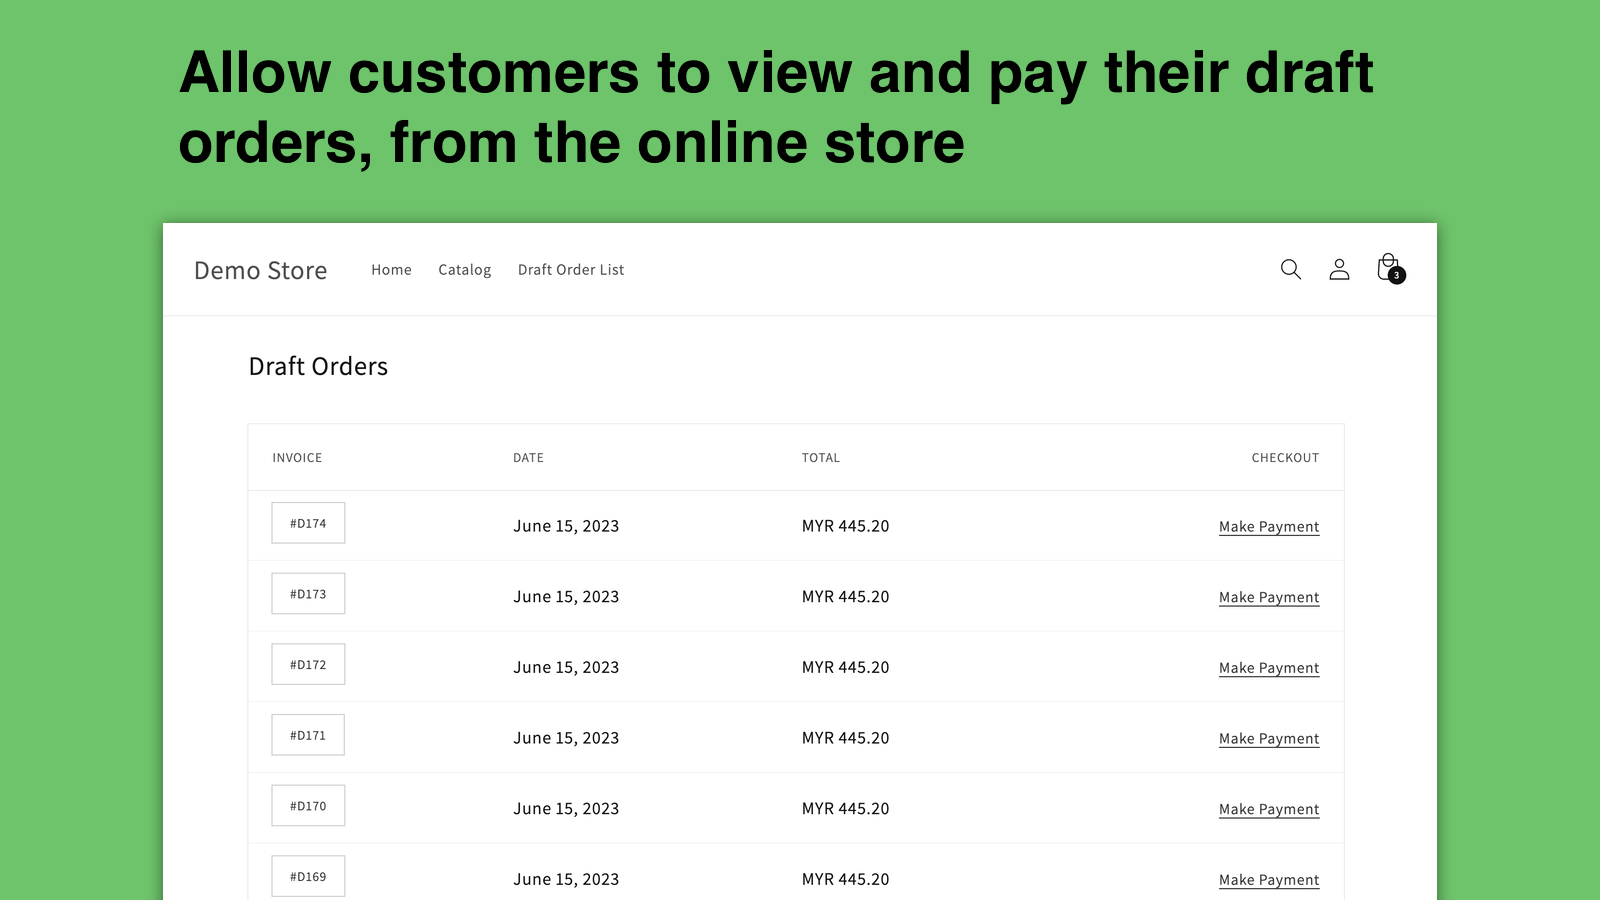 Allow customers to view and pay draft orders, from online store